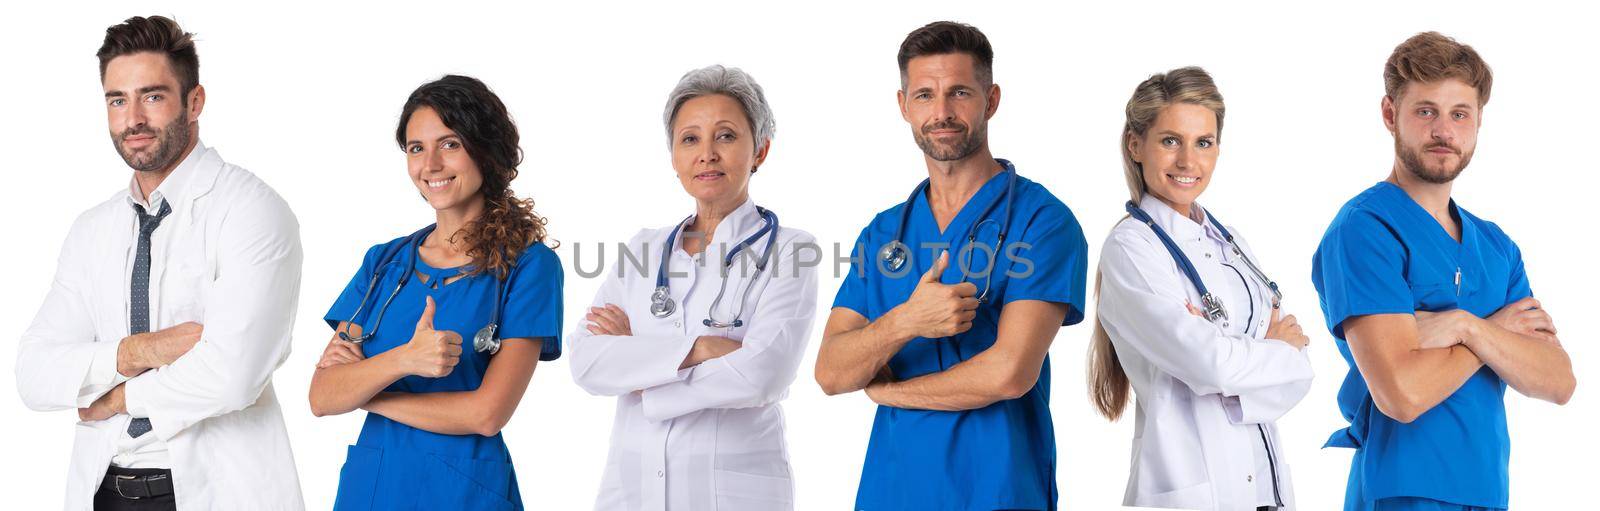 Group of doctors in a row on white by ALotOfPeople